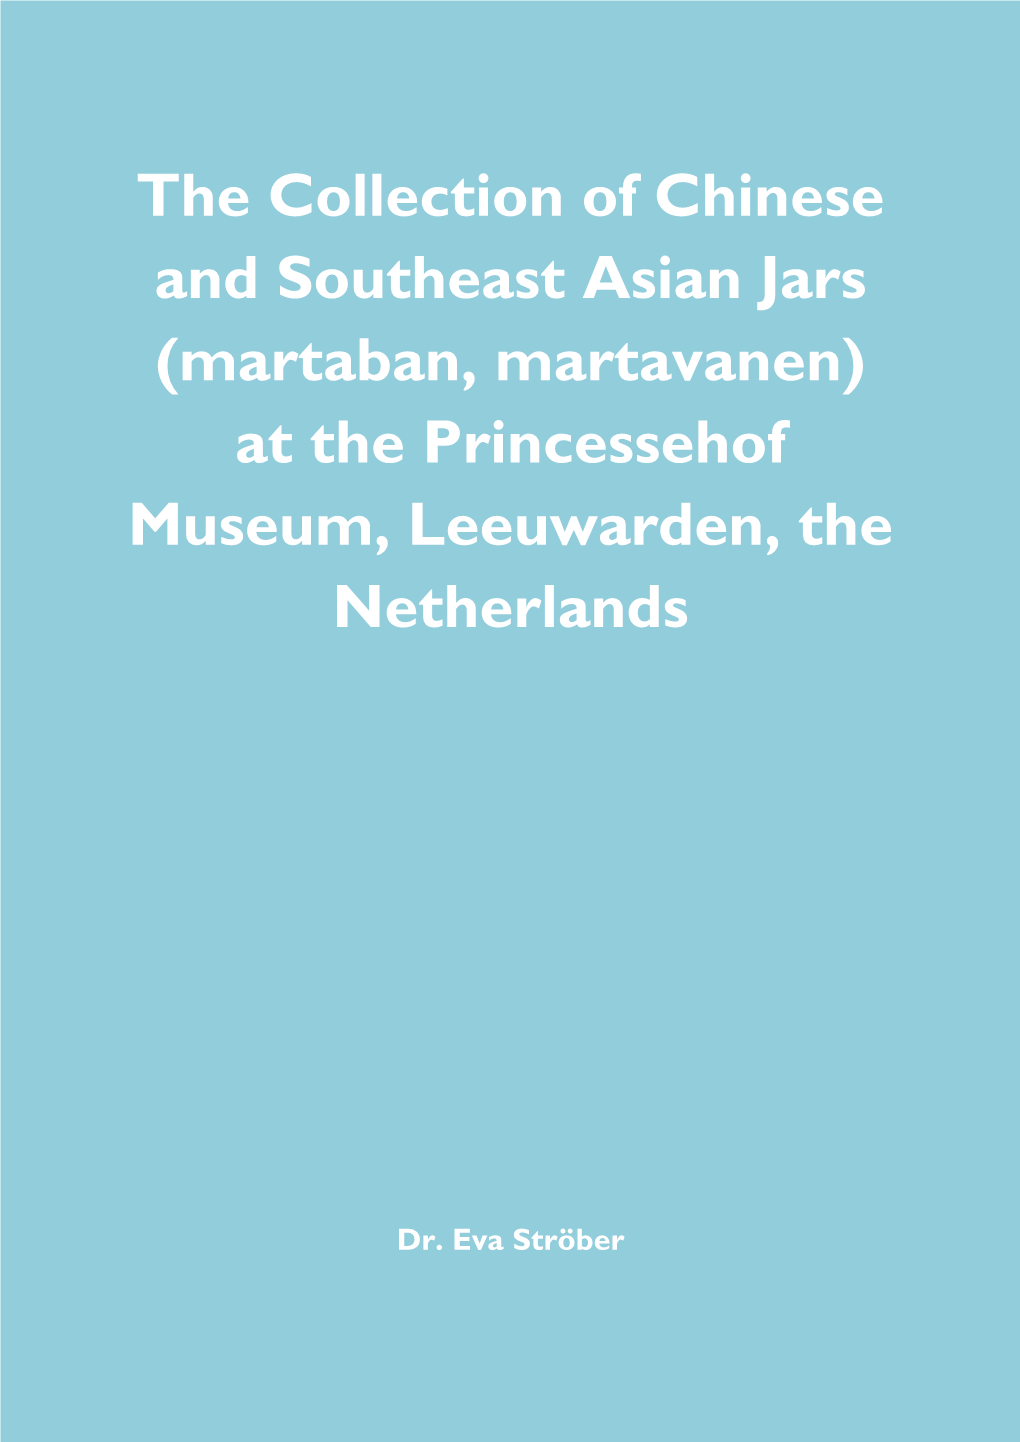 The Collection of Chinese and Southeast Asian Jars (Martaban, Martavanen) at the Princessehof Museum, Leeuwarden, the Netherlands